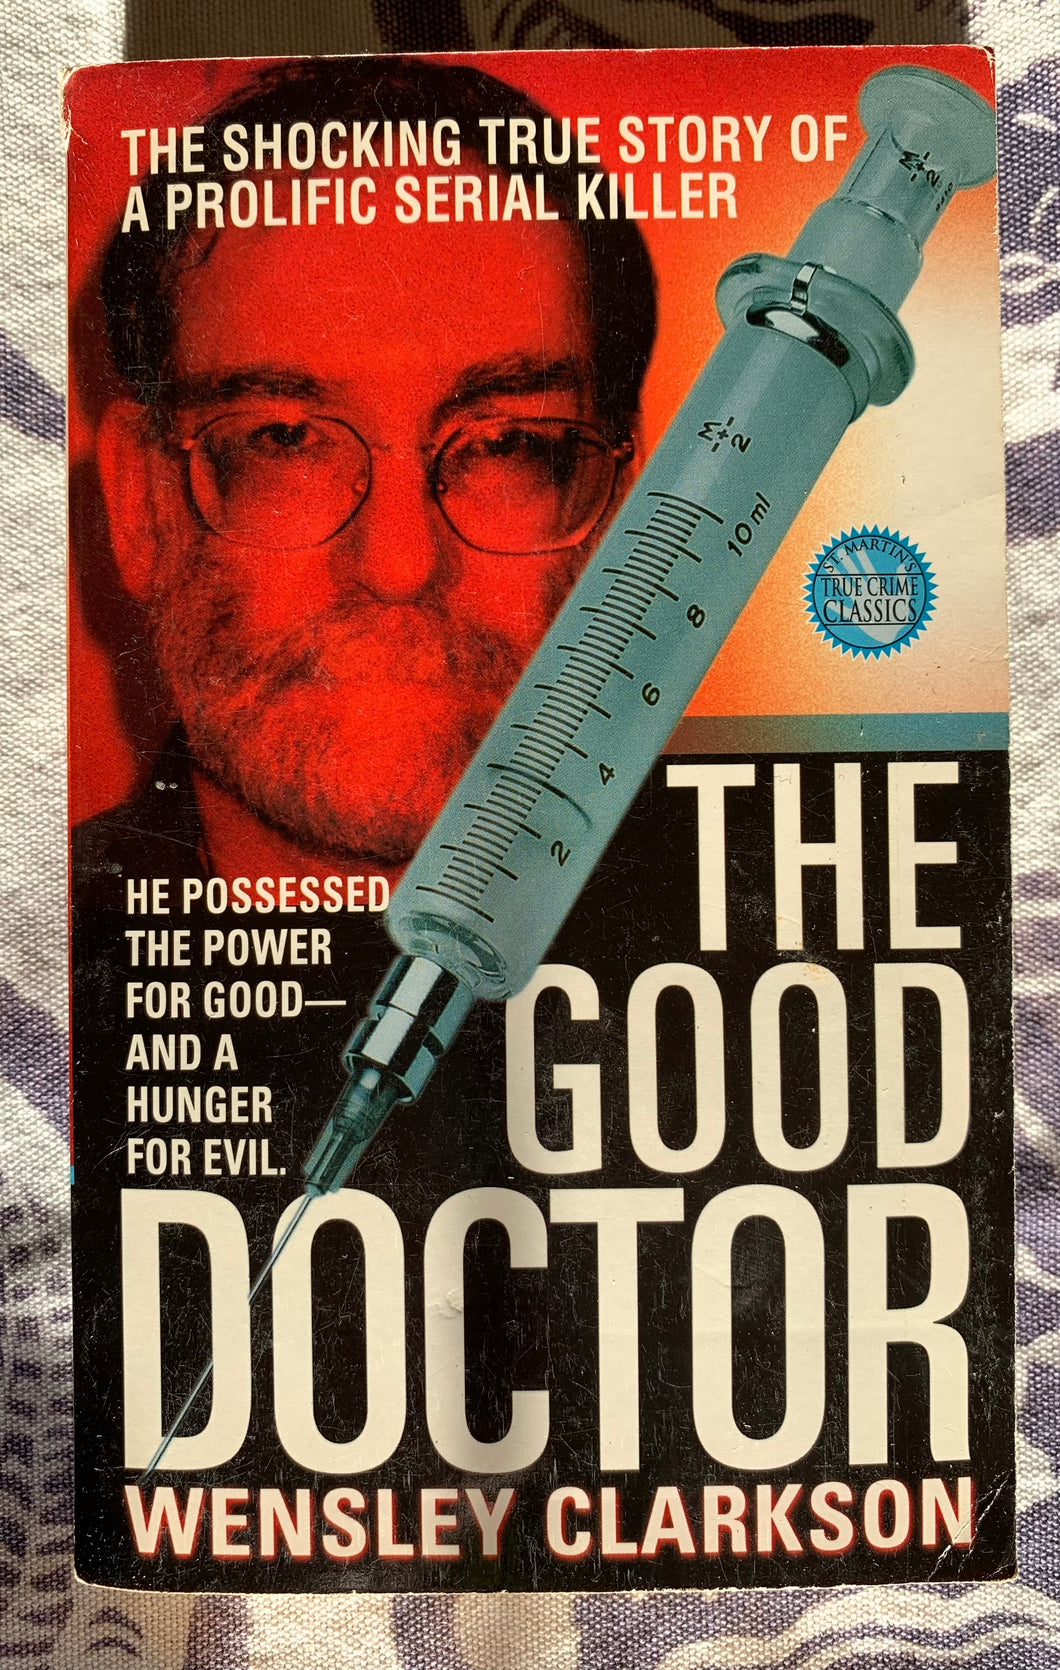 The Good Doctor: The Shocking True Story Of A Prolific Serial Killer